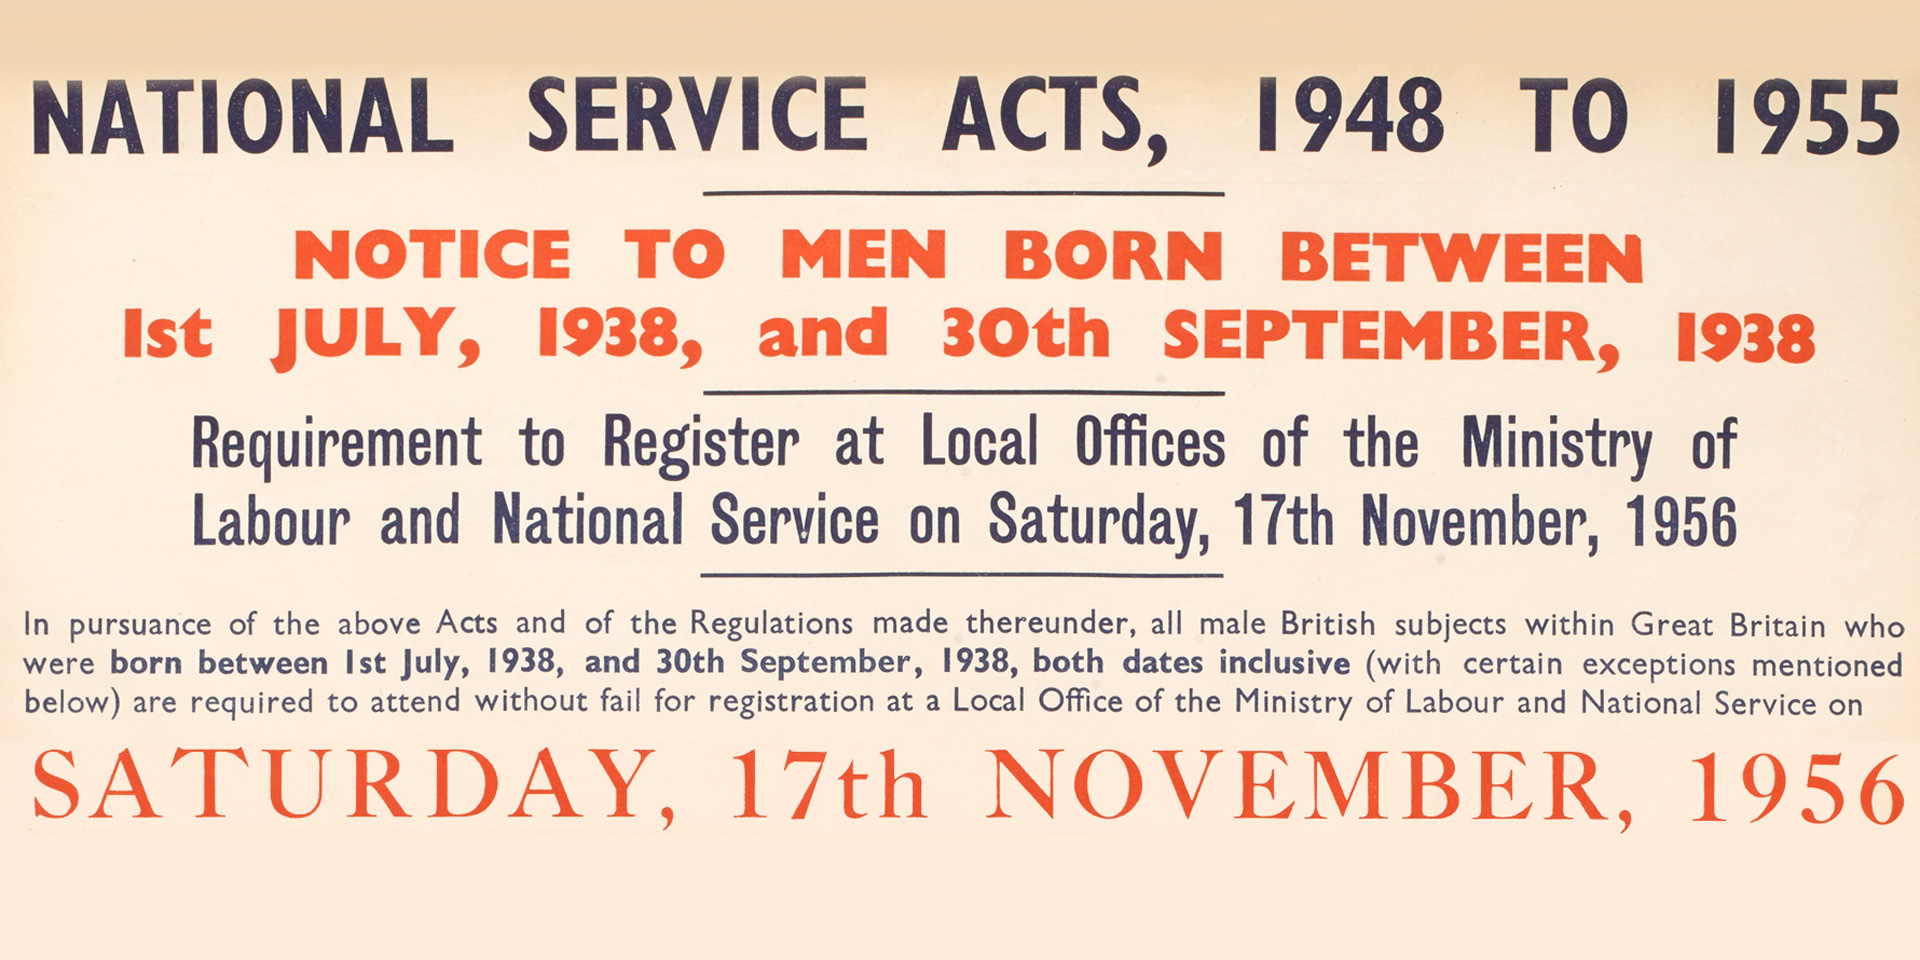 National Service Act notice, 1955